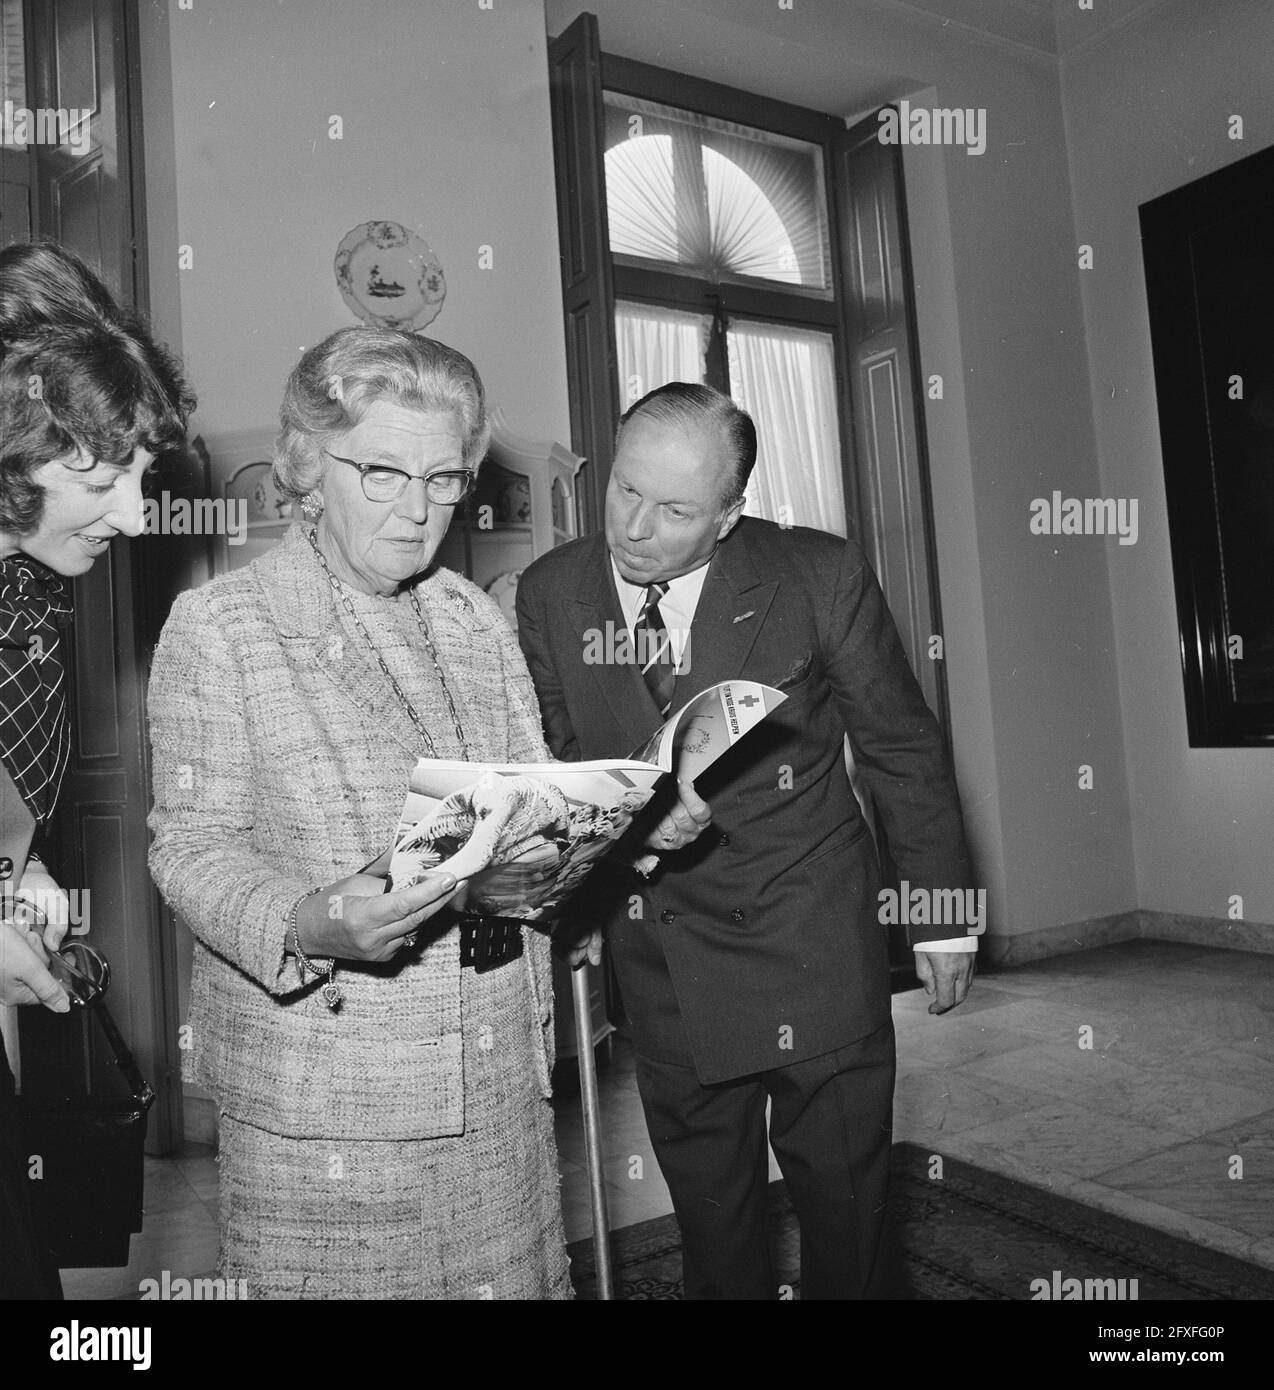 Queen Juliet receives first copy Queen Juliana 1925-1965 from hands of G. Krayenhoff. The Queen and Krayenhoff with magazine, September 13, 1973, copies, queens, receptions, The Netherlands, 20th century press agency photo, news to remember, documentary, historic photography 1945-1990, visual stories, human history of the Twentieth Century, capturing moments in time Stock Photo